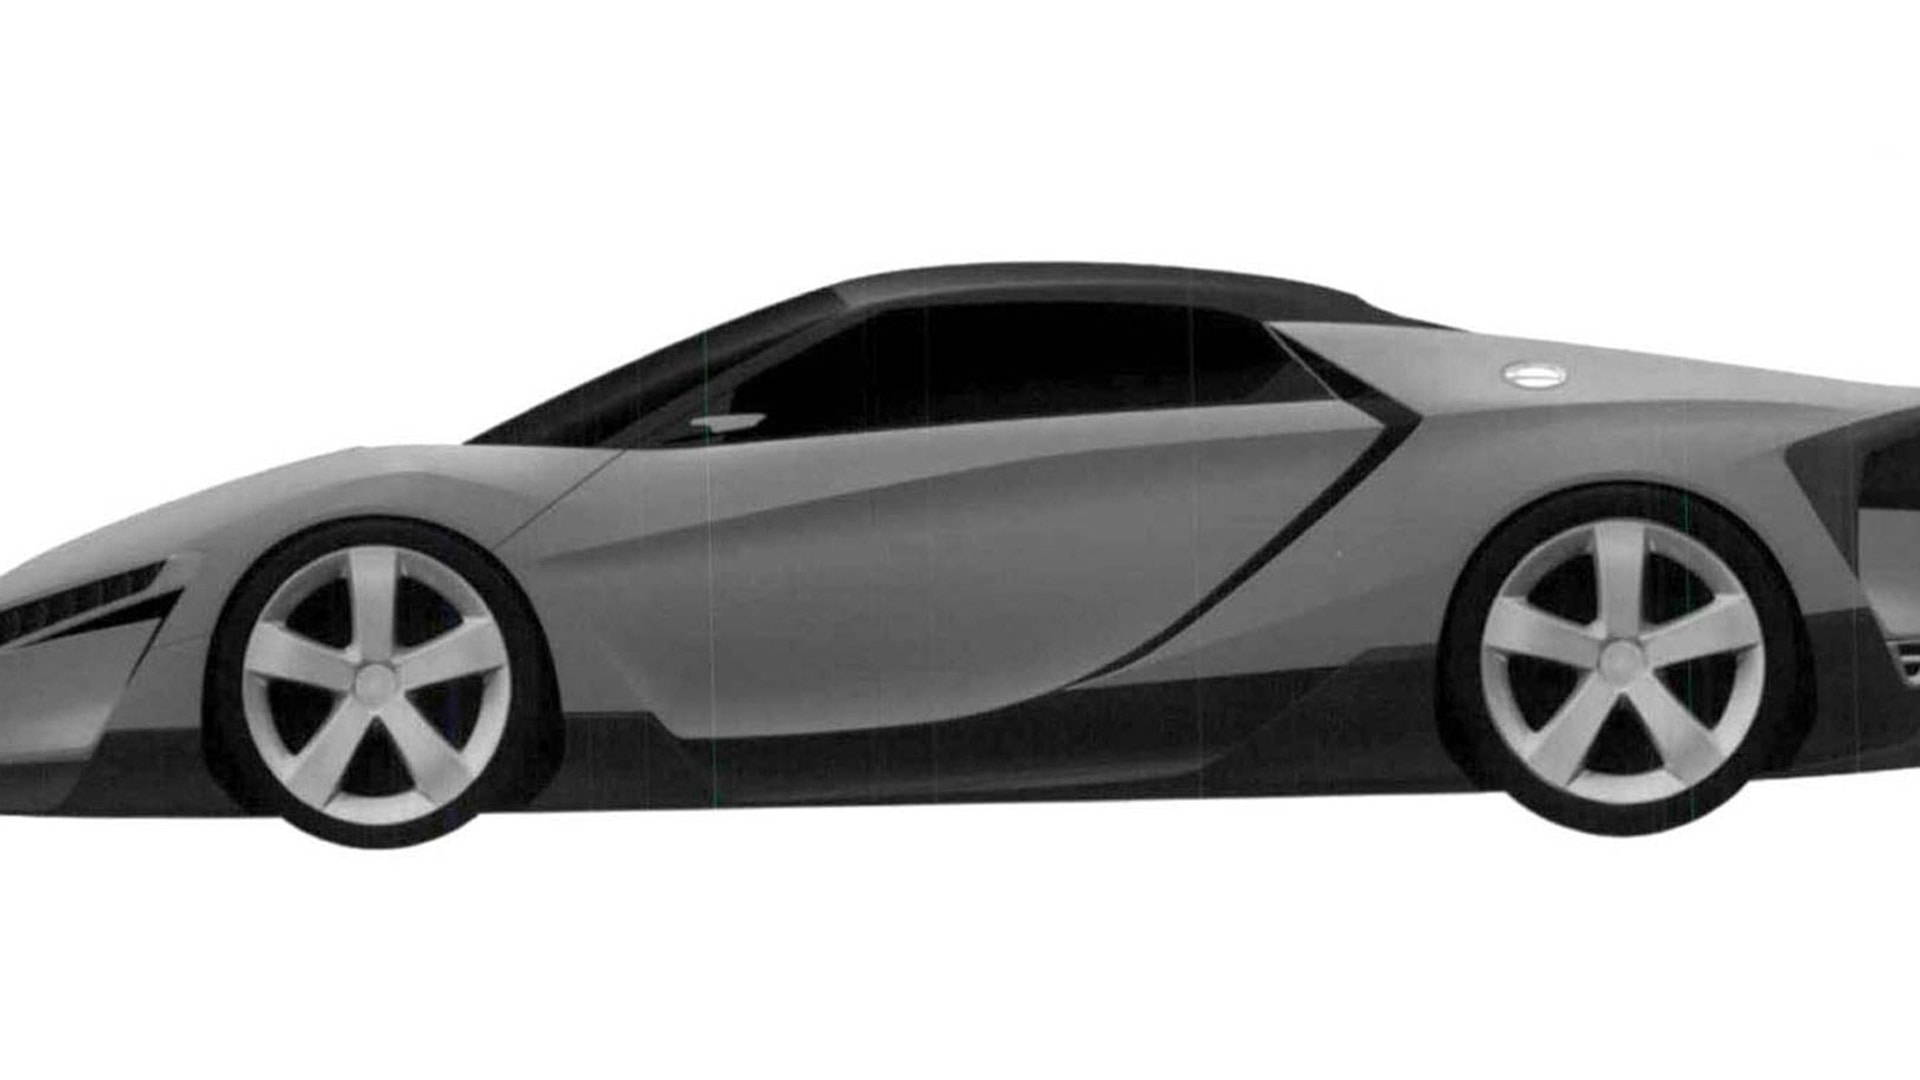 Patent drawing for mid-engine sports car filed by Honda - Image via Autovisie